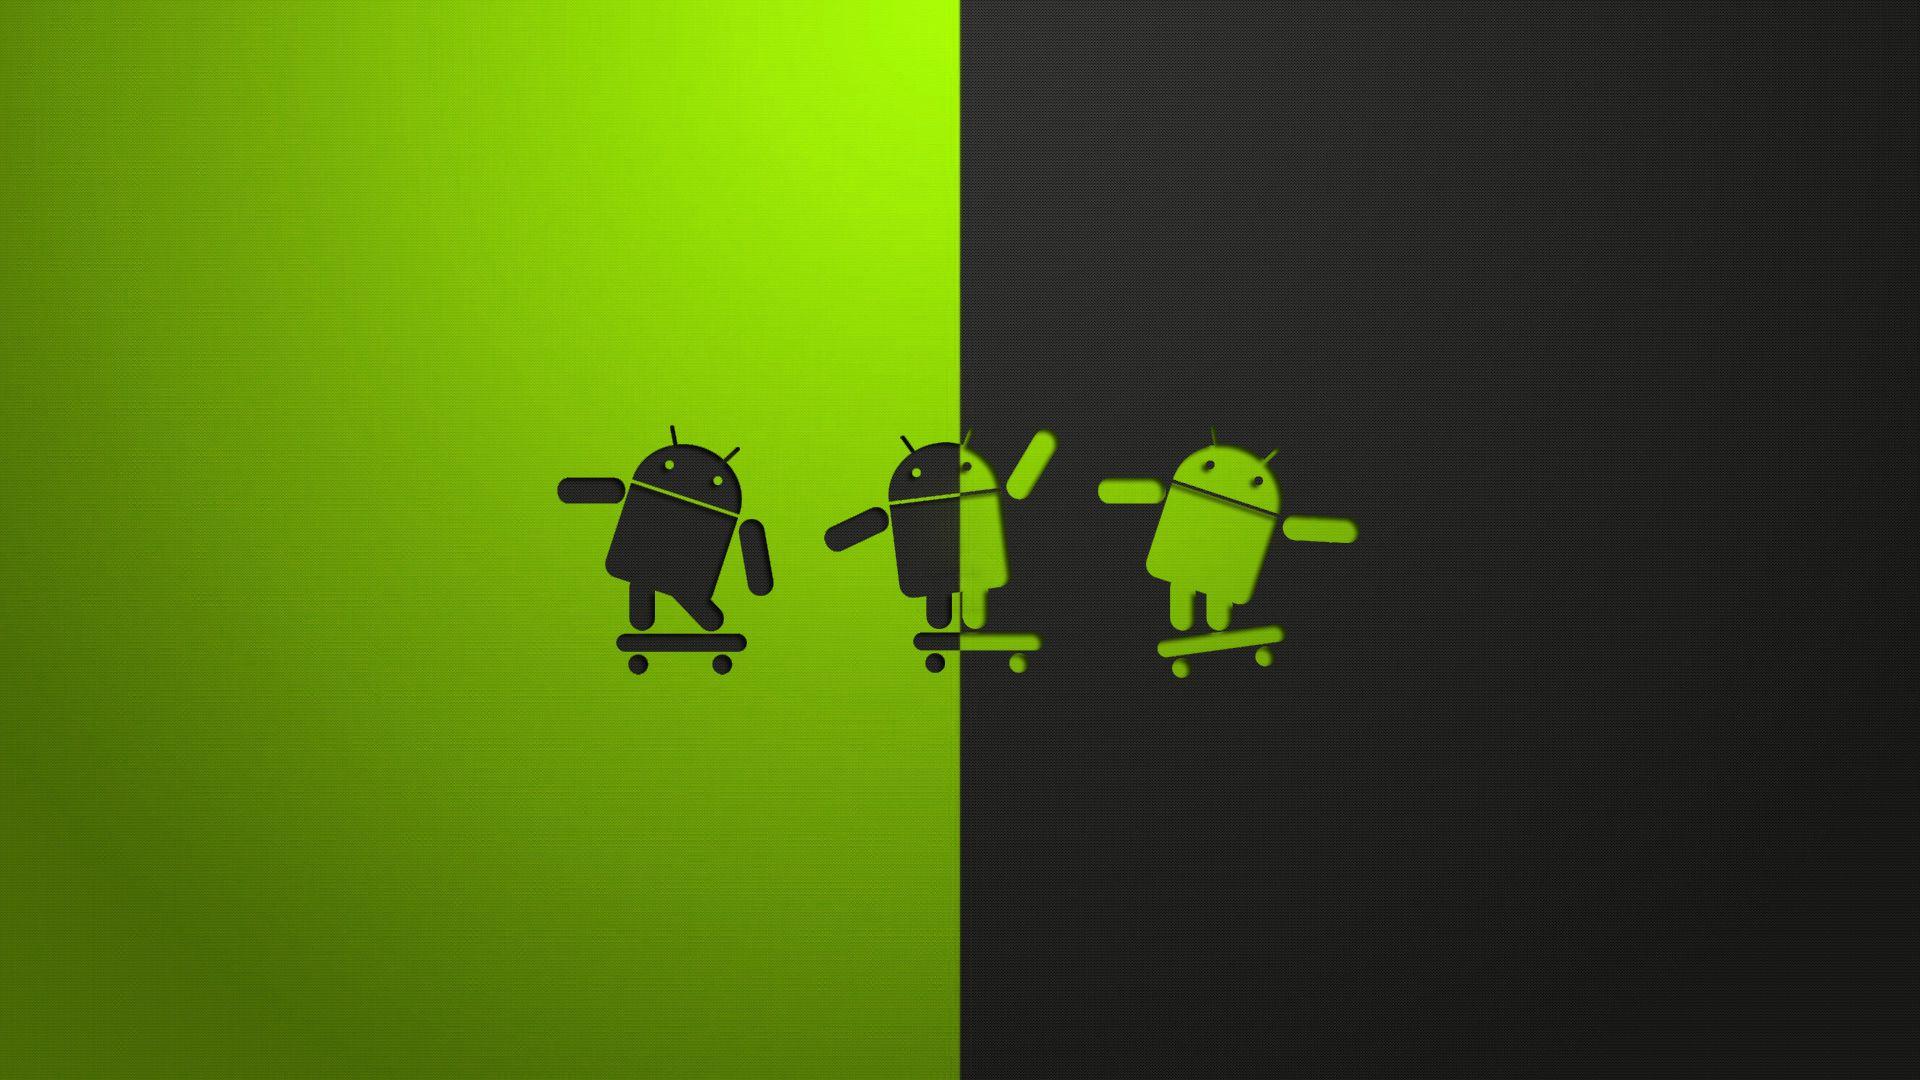 Cool Android Wallpapers 45250 1920x1080 px ~ HDWallSource